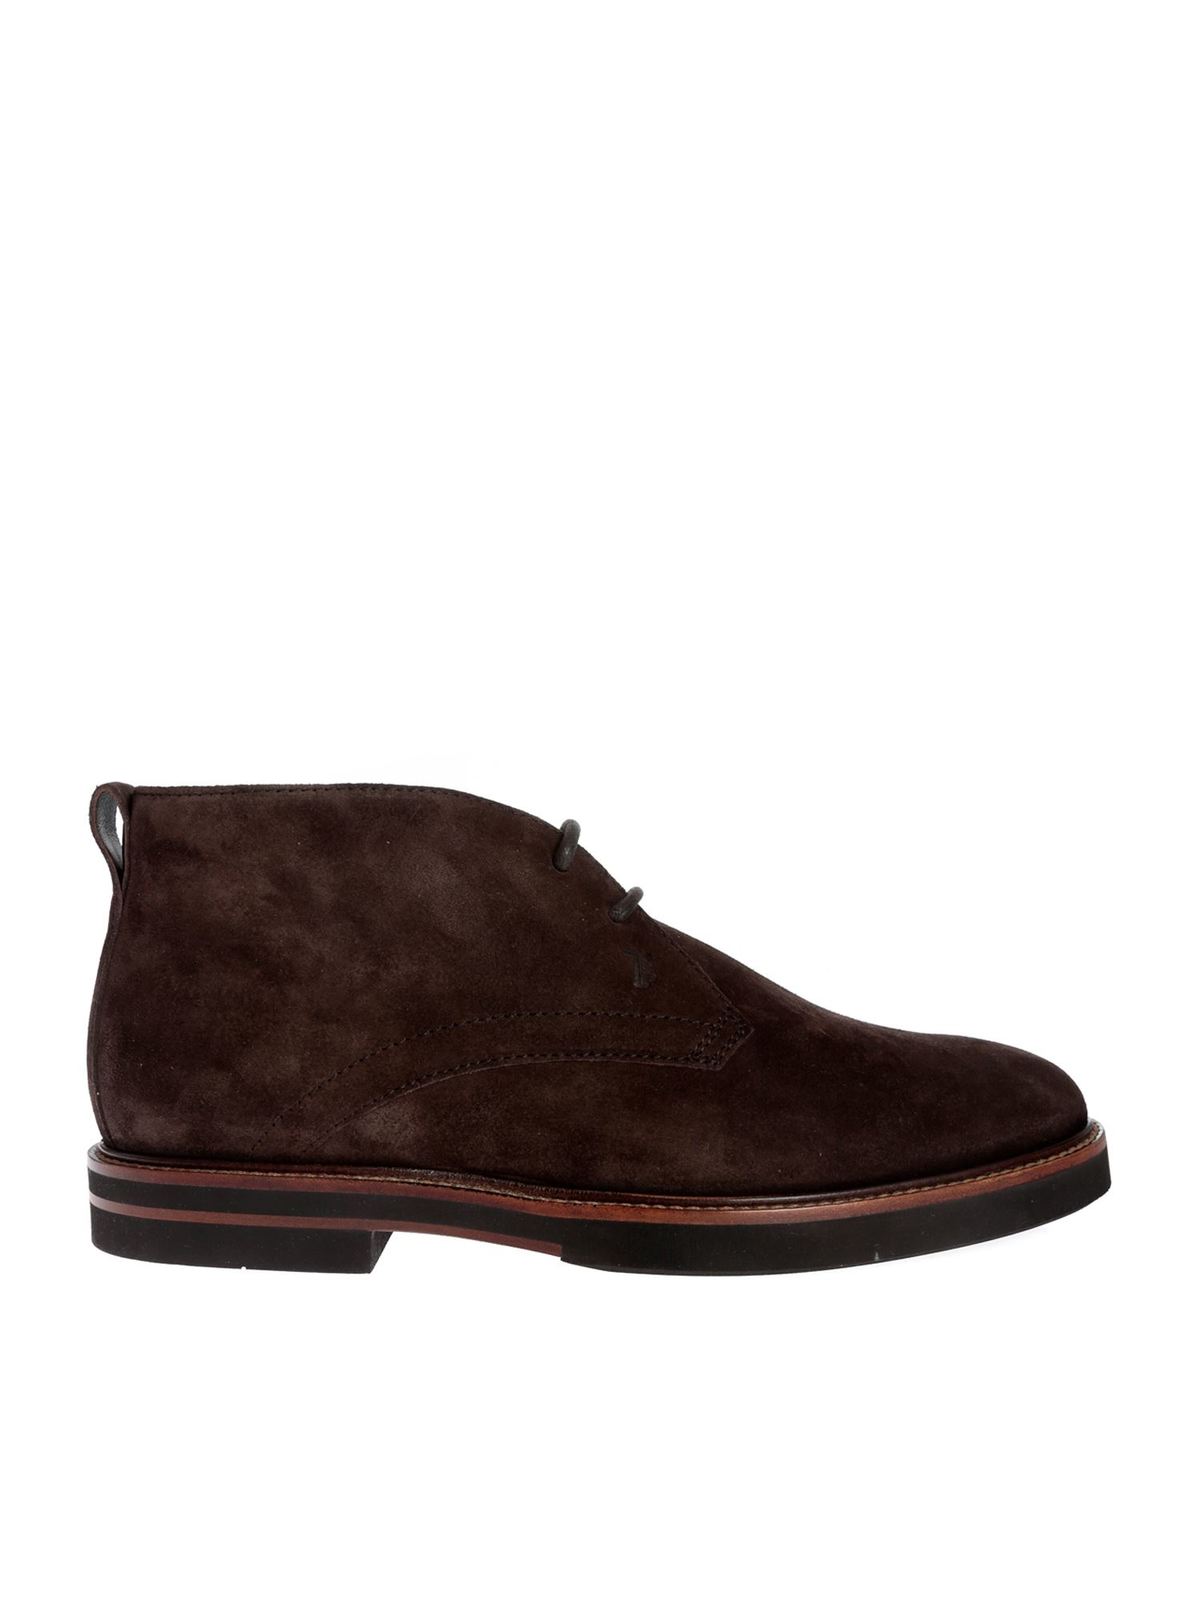 TOD'S BROWN SUEDE DESERT SHOES